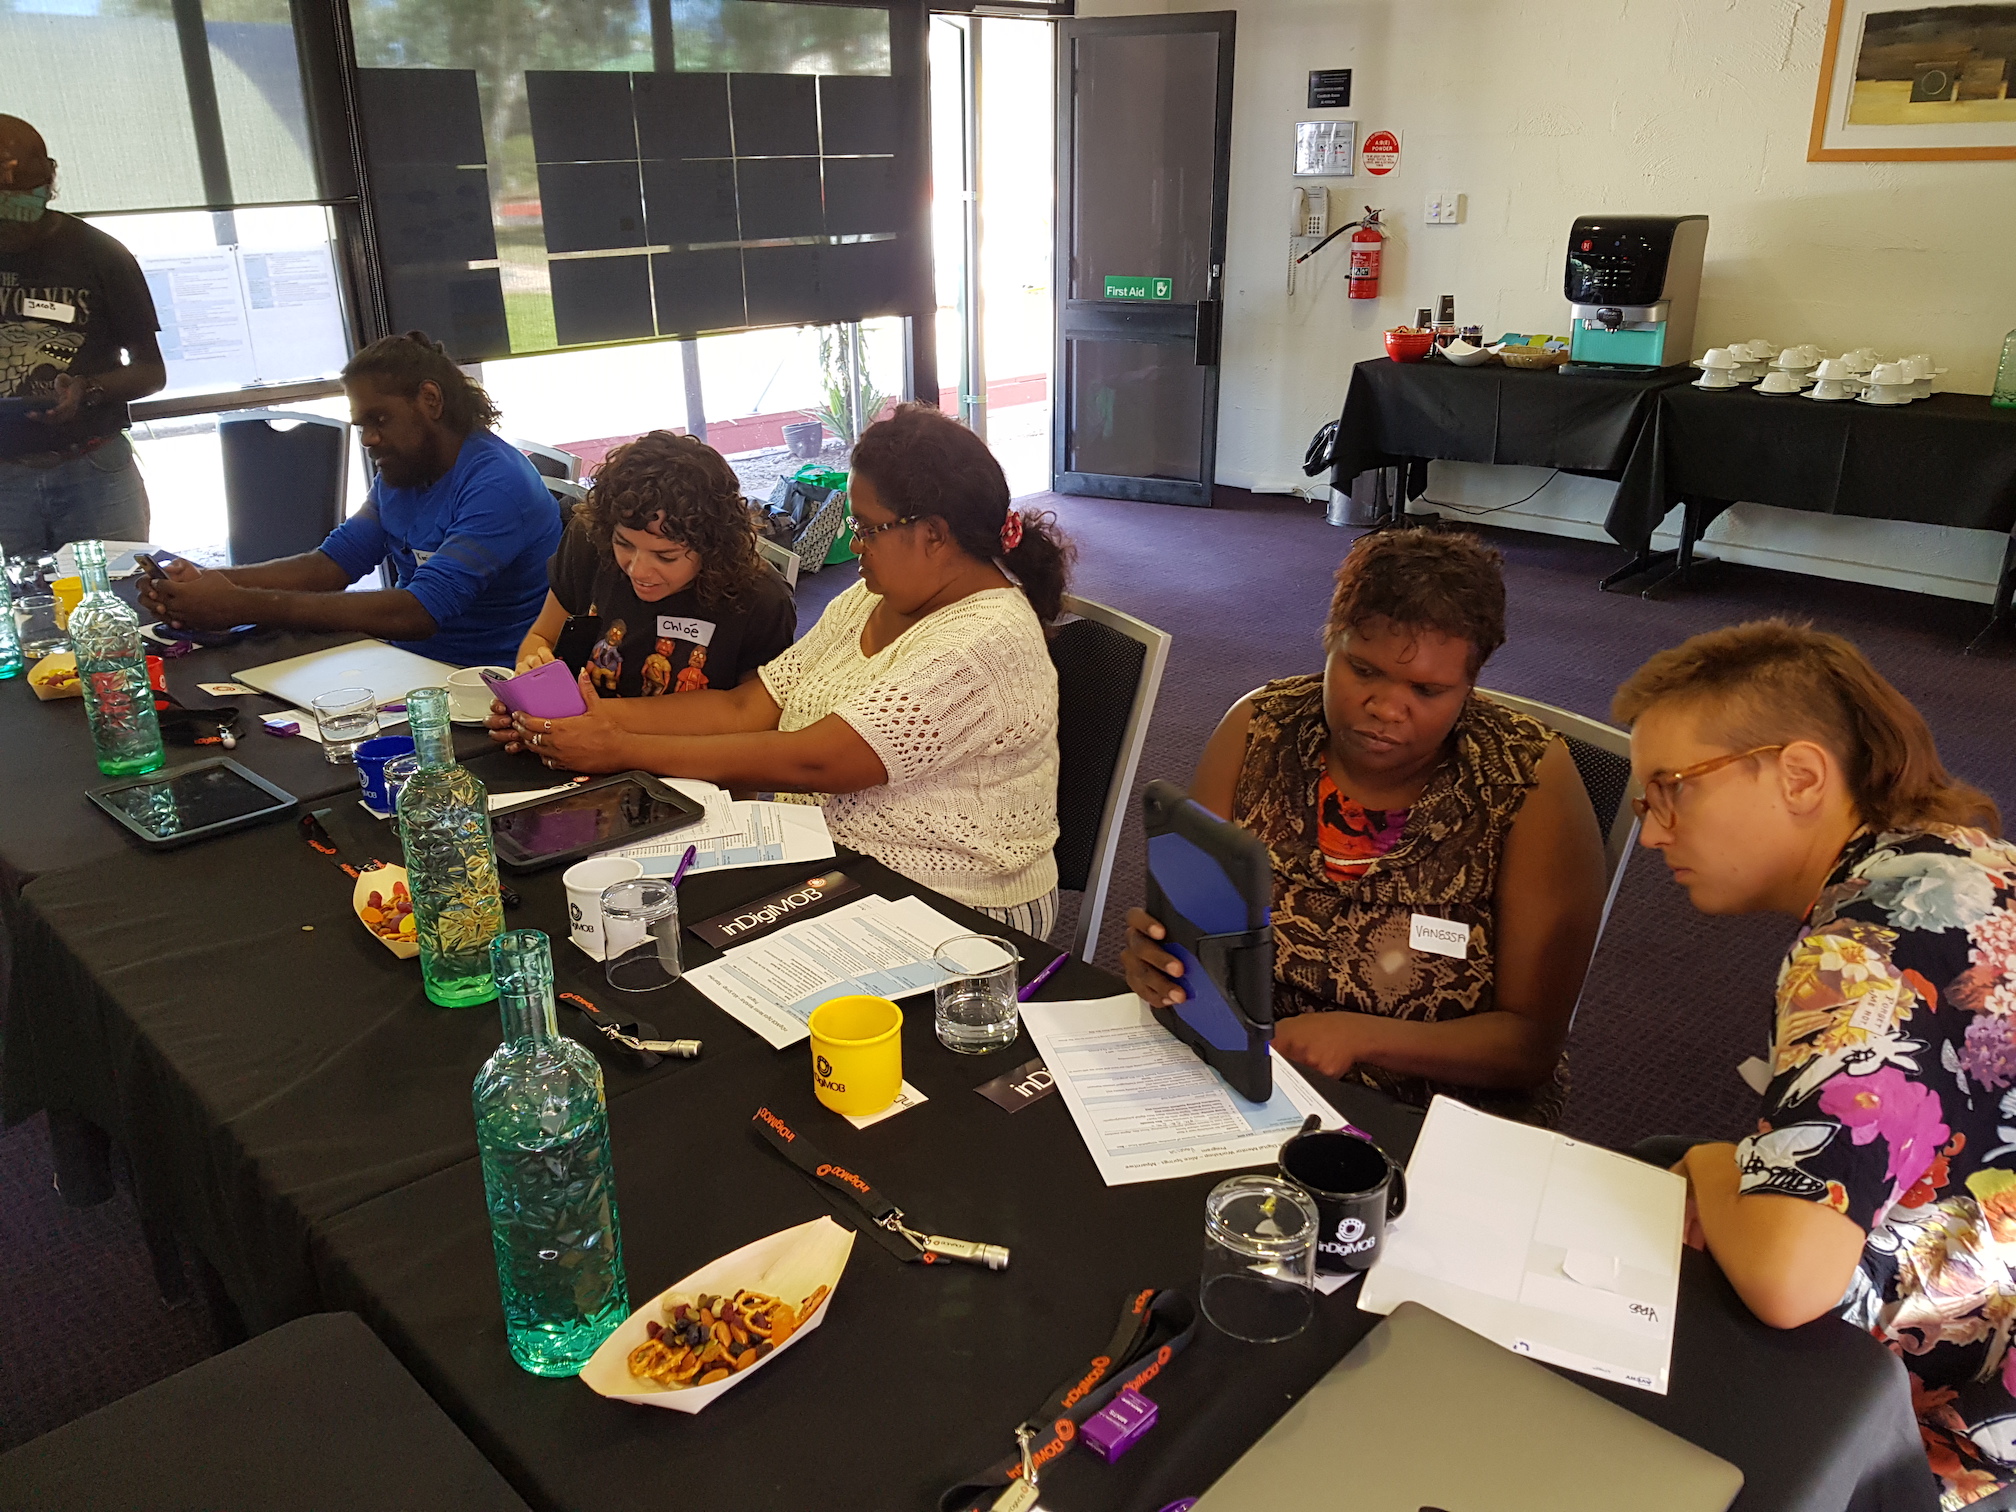  People  with Aboriginal and Torres Strait Islander backgrounds participating in research